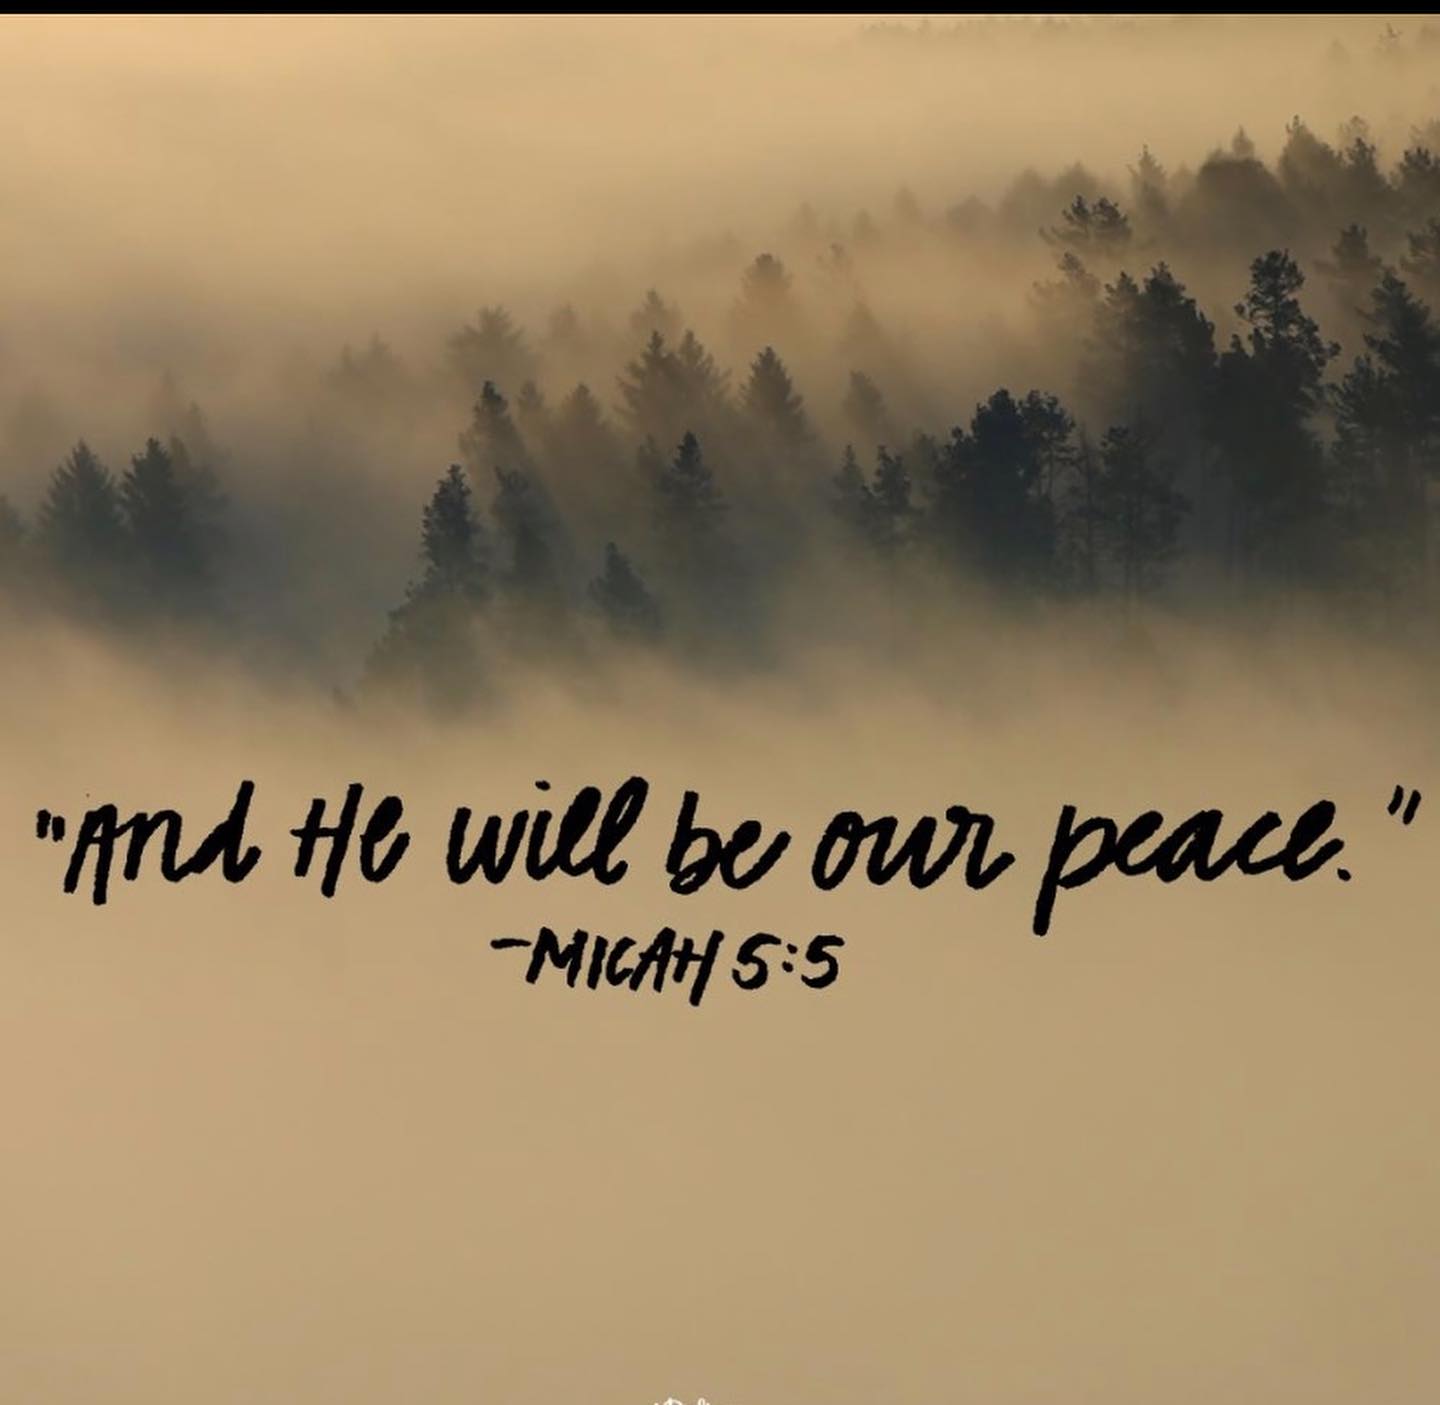 Where does your peace come from?  The world offers many ways to find peace, yet it doesn’t last and often leaves us [...]
</p>
</body></html>